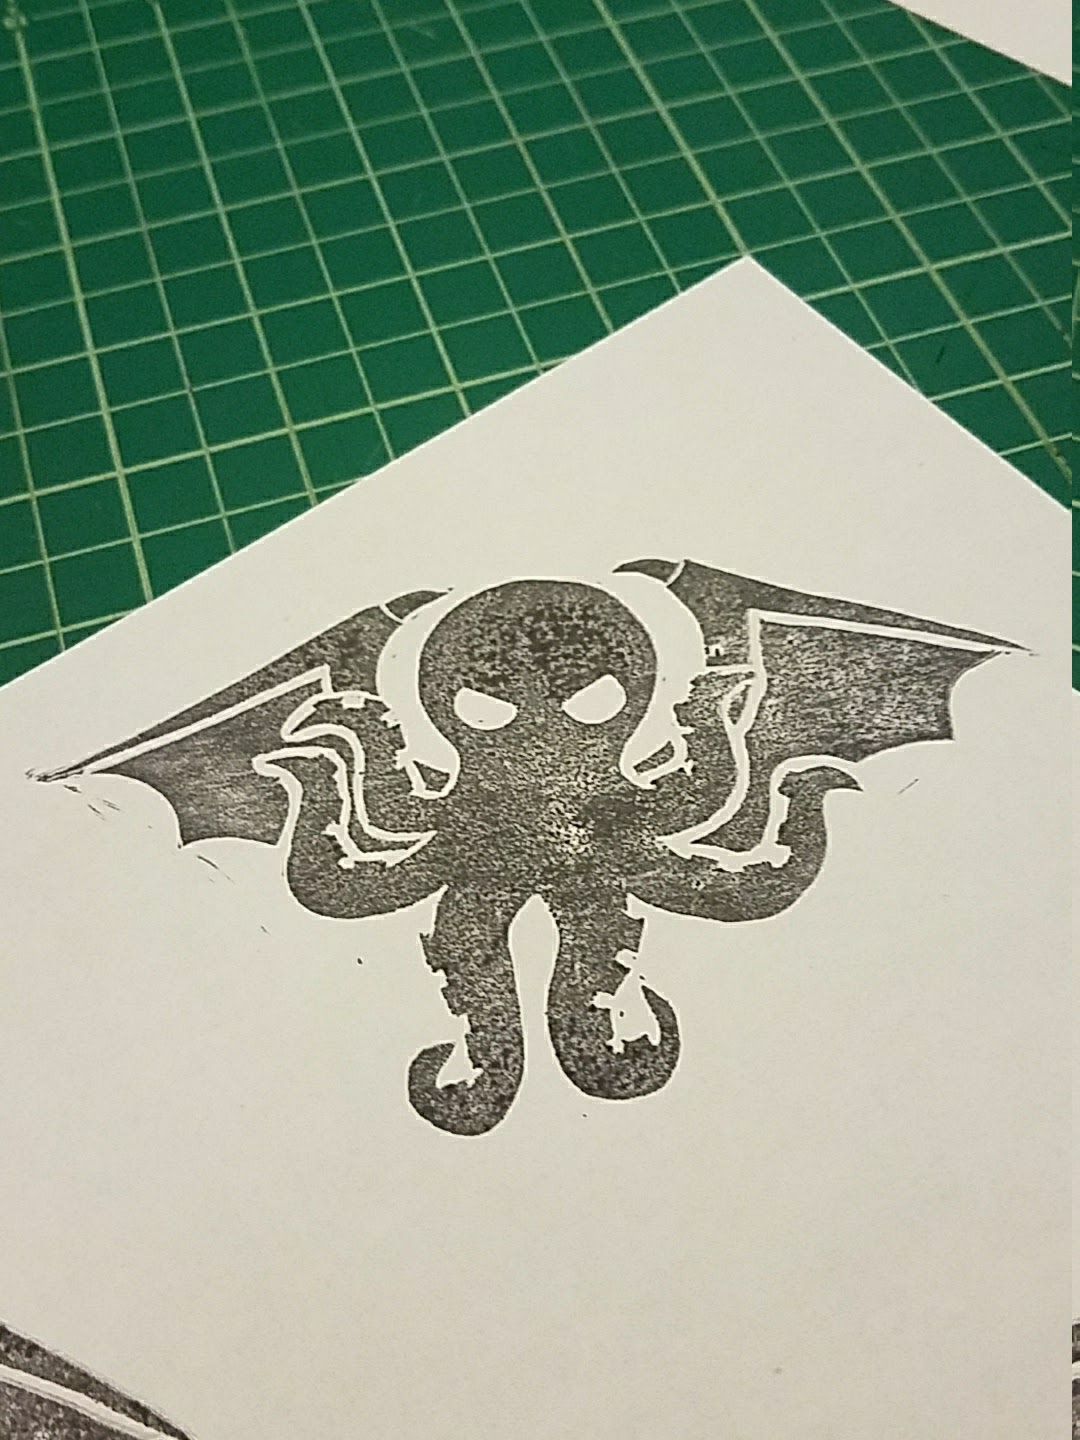 A block-printed image of Cthulhu's head and wings in a mottled black on a corner of a piece of white paper. The paper is resting on a gridded green cutting mat.